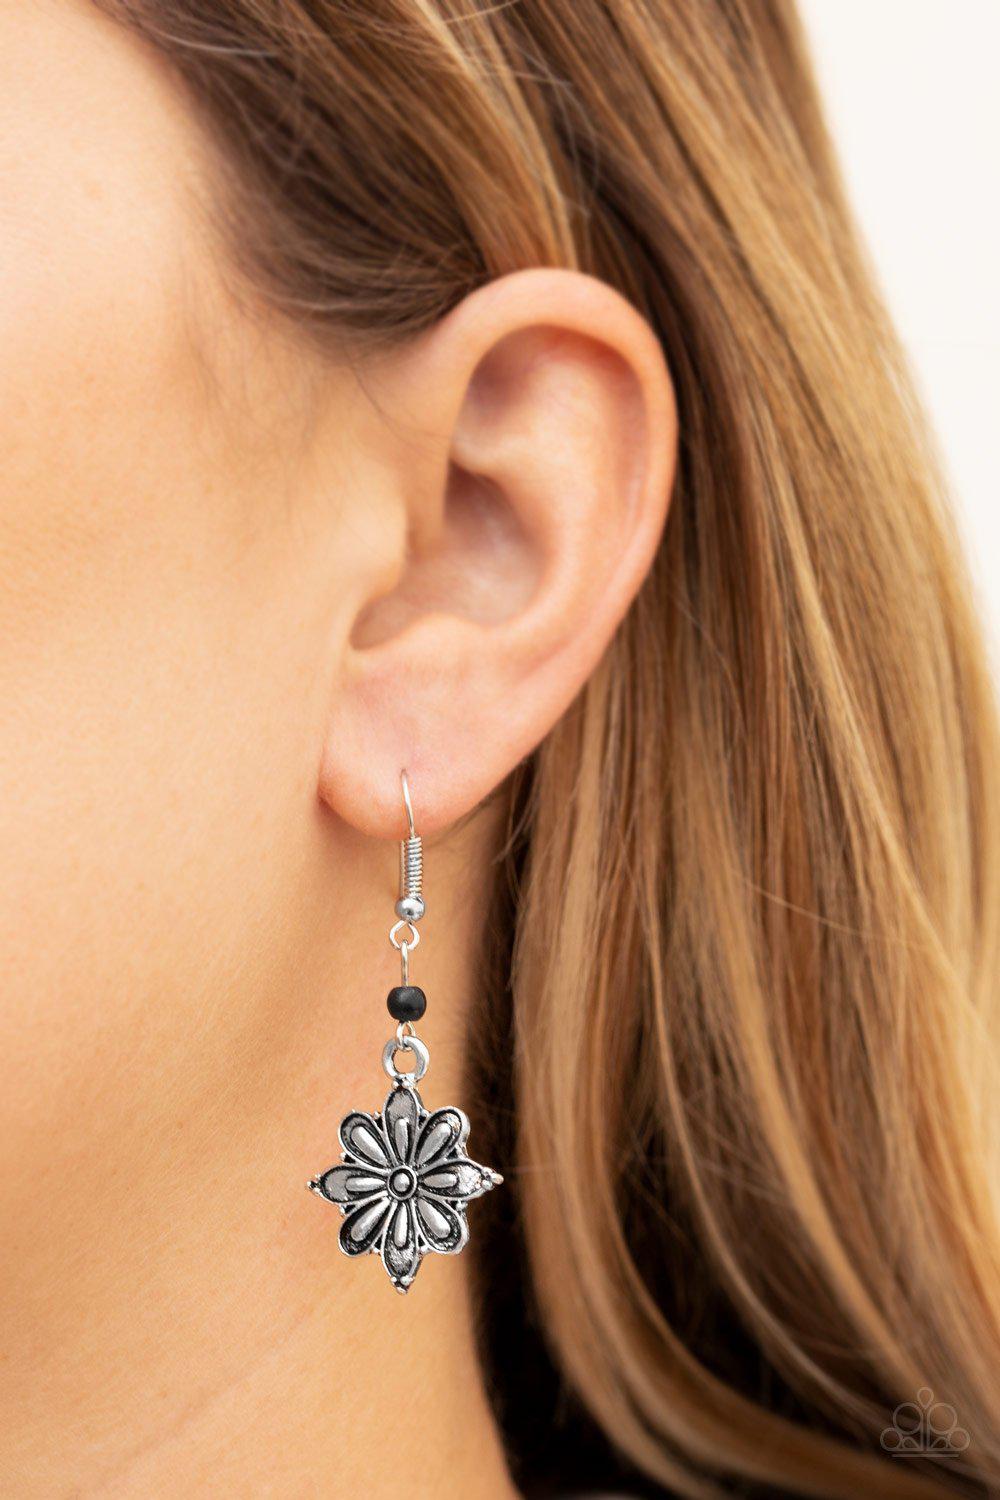 Cactus Blossom Black and Silver Flower Earrings - Paparazzi Accessories - model -CarasShop.com - $5 Jewelry by Cara Jewels